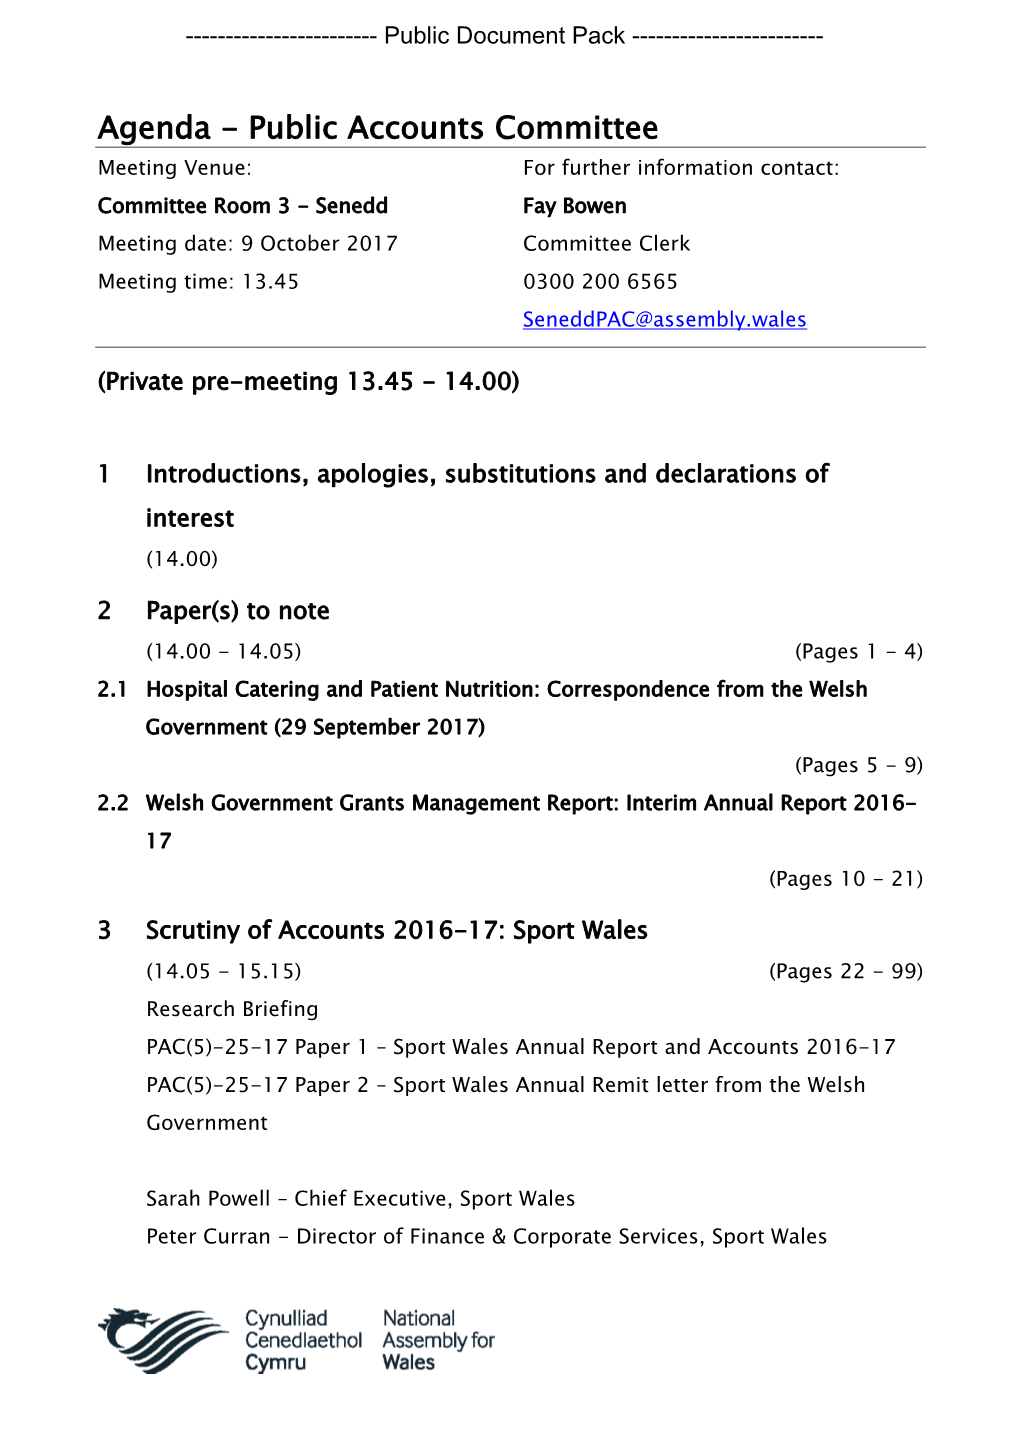 (Public Pack)Agenda Document for Public Accounts Committee, 09/10